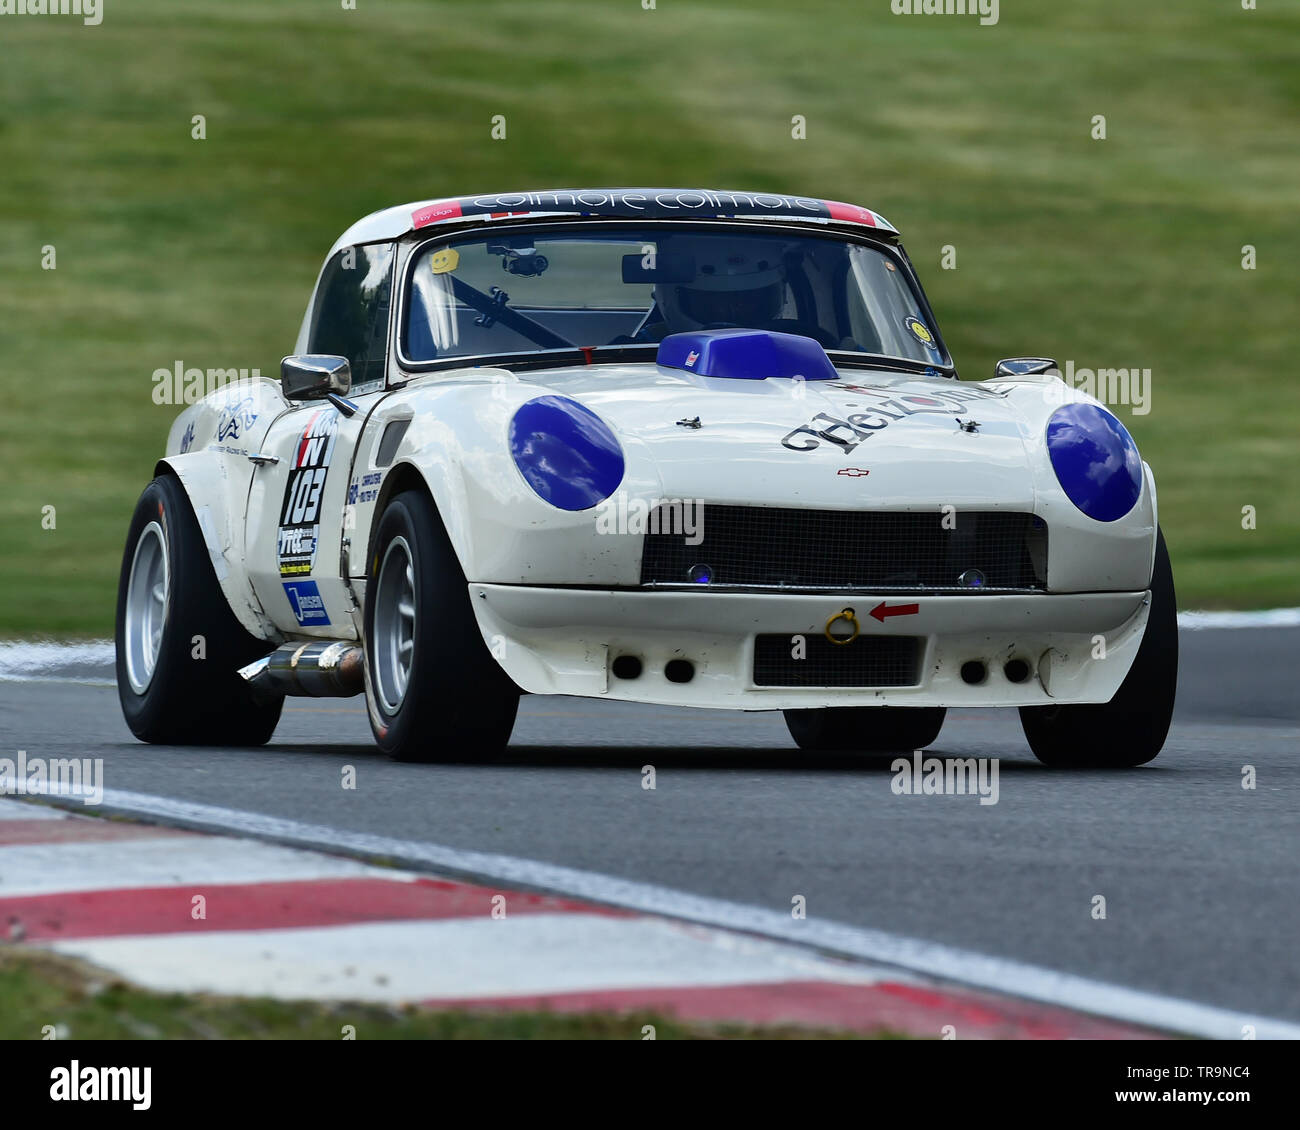 Urs Steffen, Triumph Spitfire GT8, Youngtimer Touring Car Challenge, YTCC, Masters Historic Festival, Brands Hatch, May 2019. Brands Hatch, classic ca Stock Photo